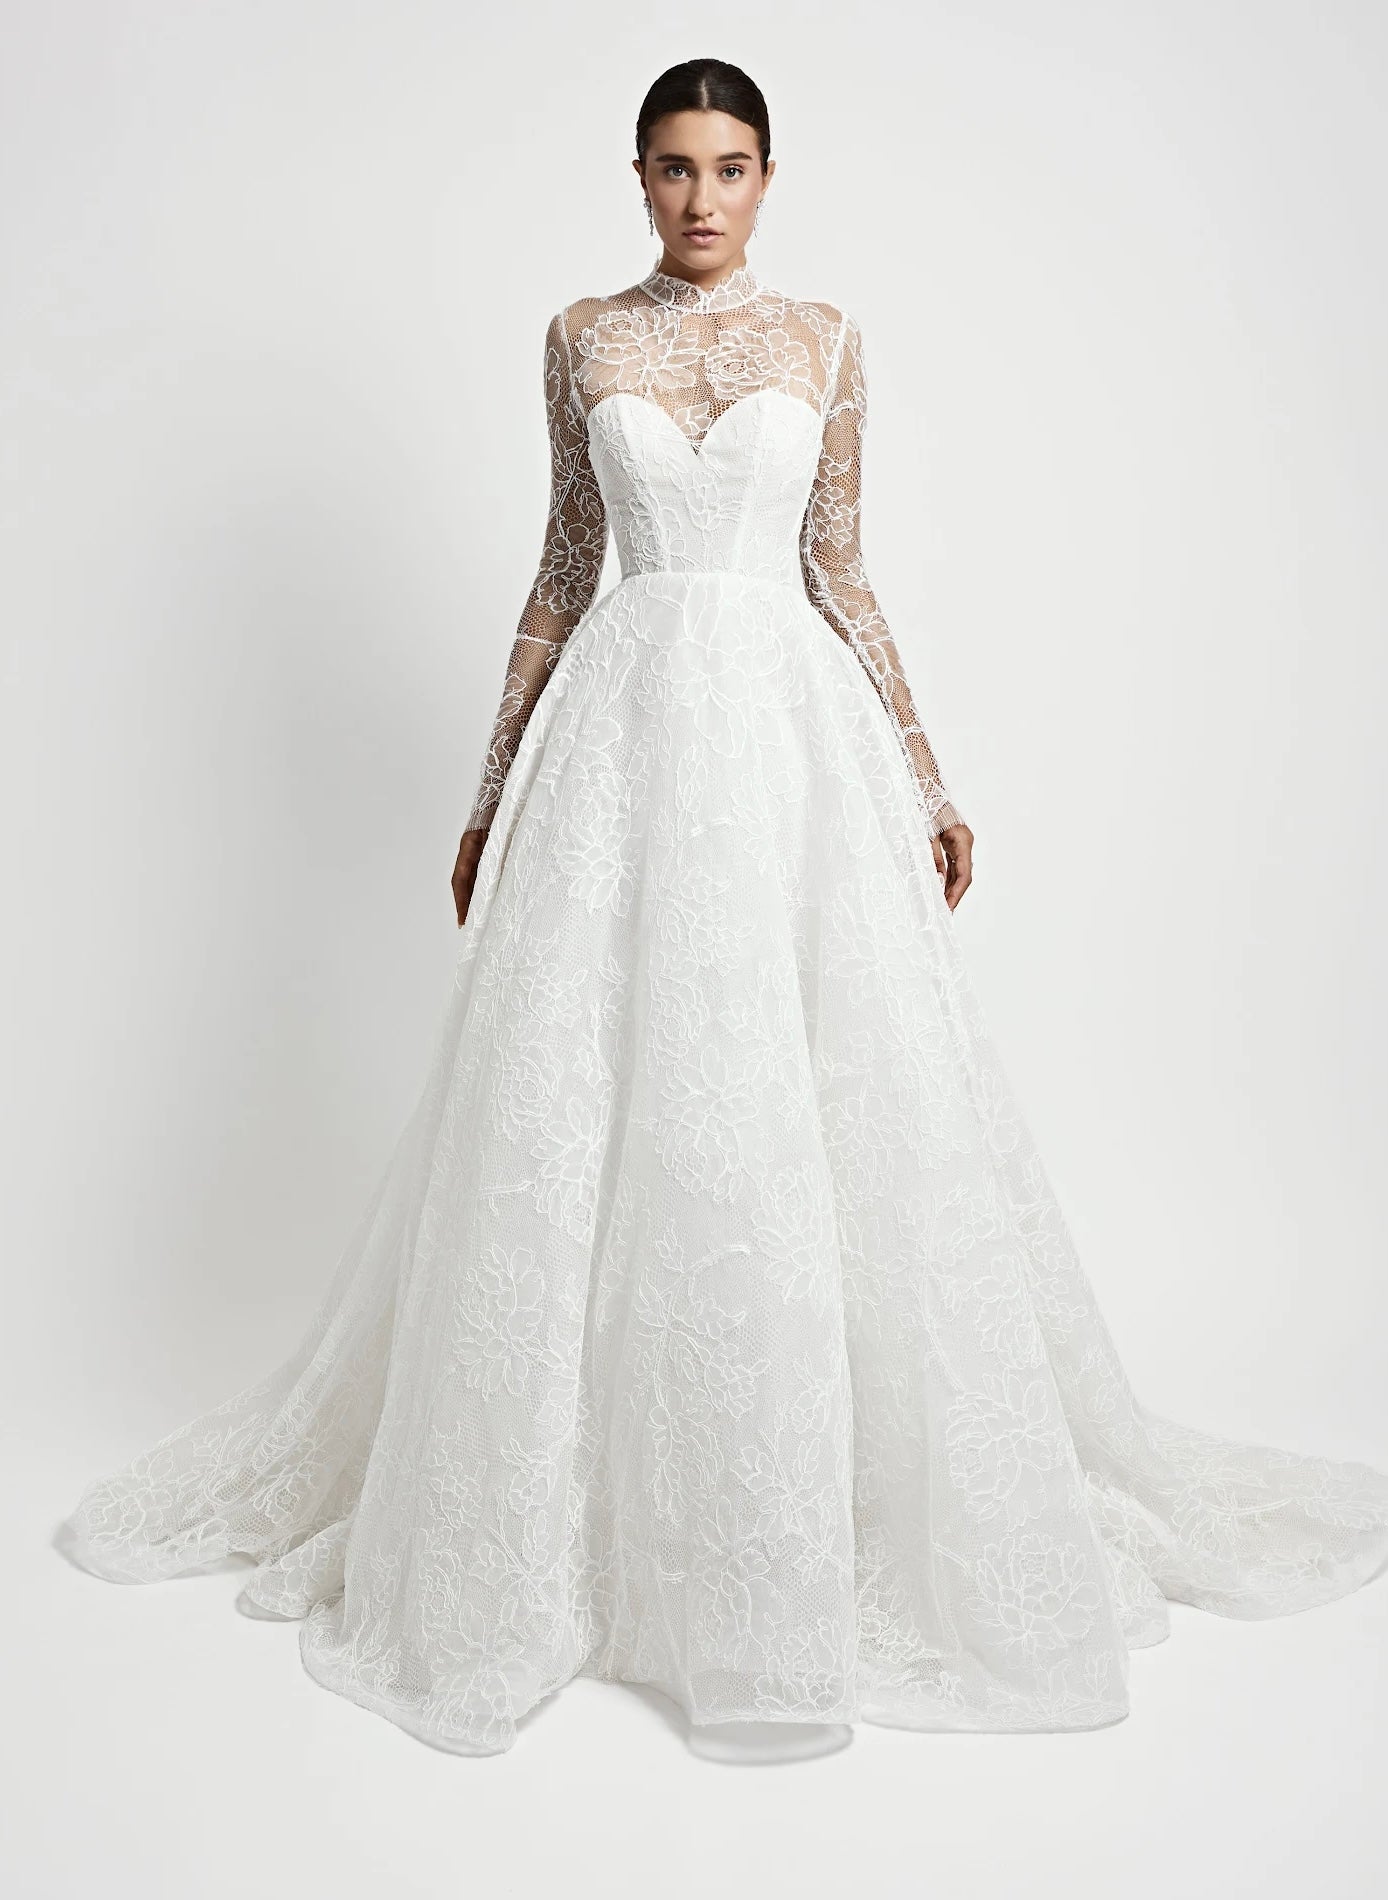 Elegant High-Neck Long Sleeve Floral Lace Ball Gown by Jaclyn Whyte - Image 1